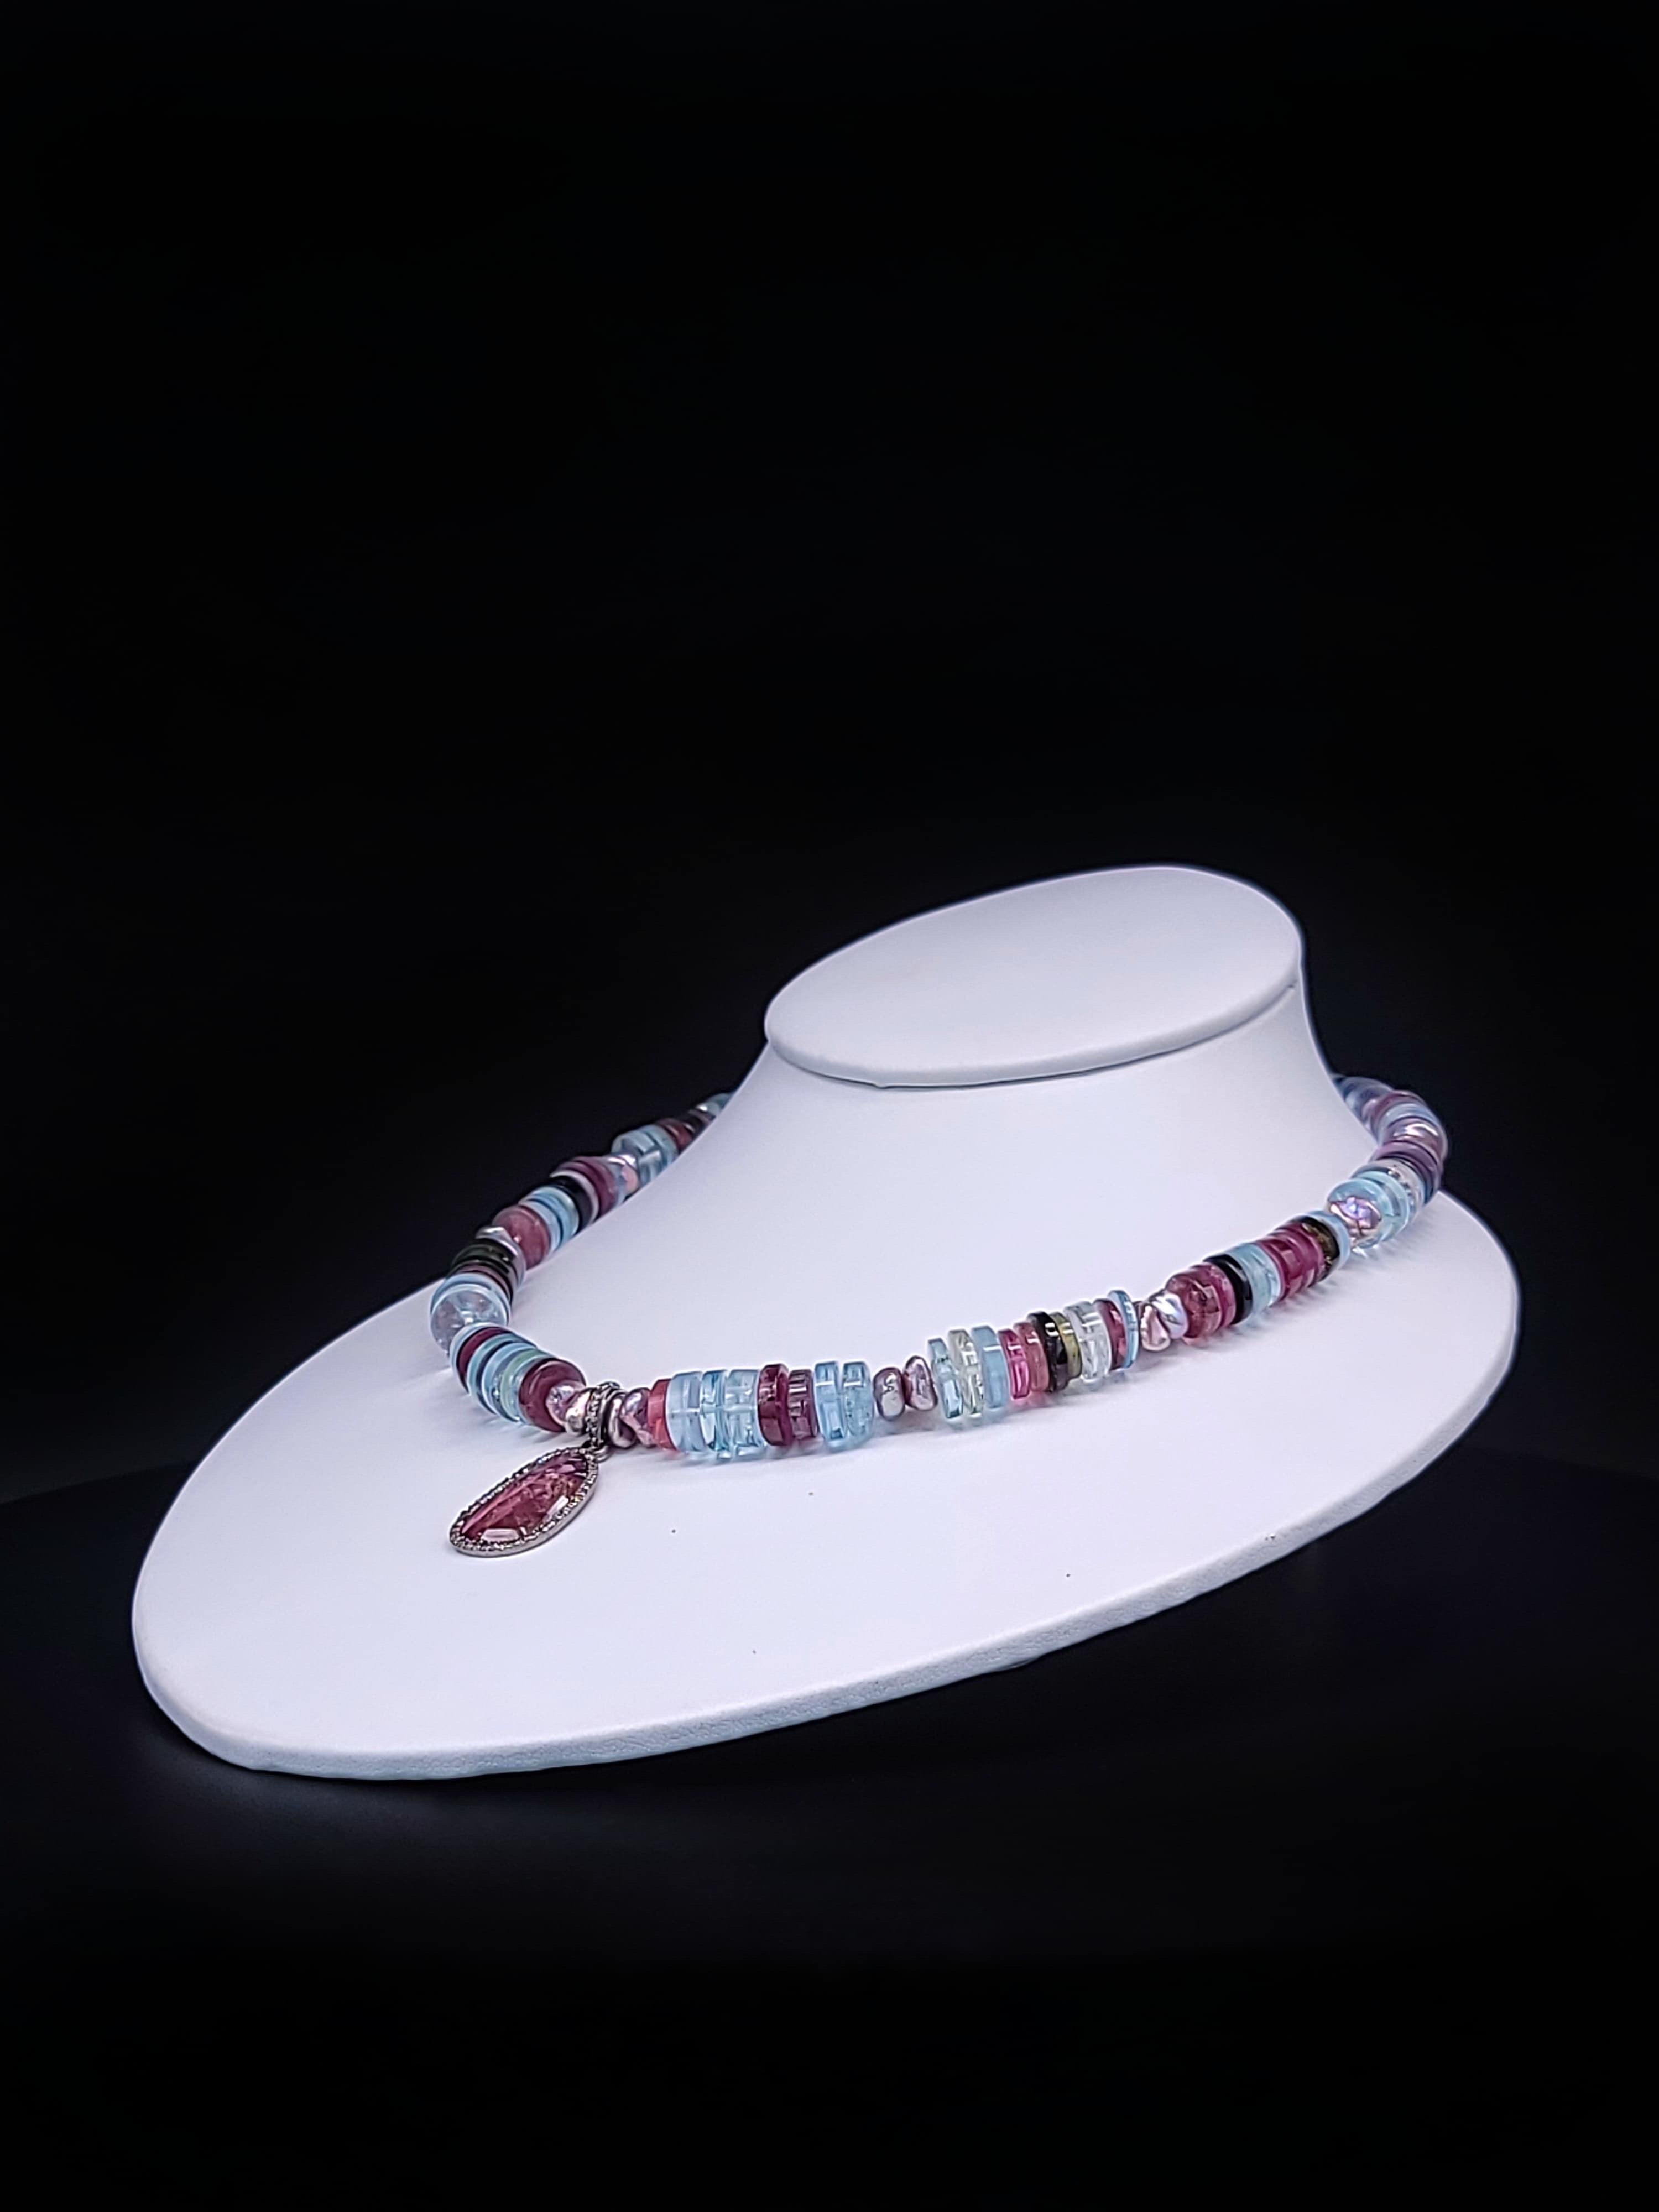 A.Jeschel Tourmaline and Aquamarine cleverly merge in a gentle ladylike necklace 8